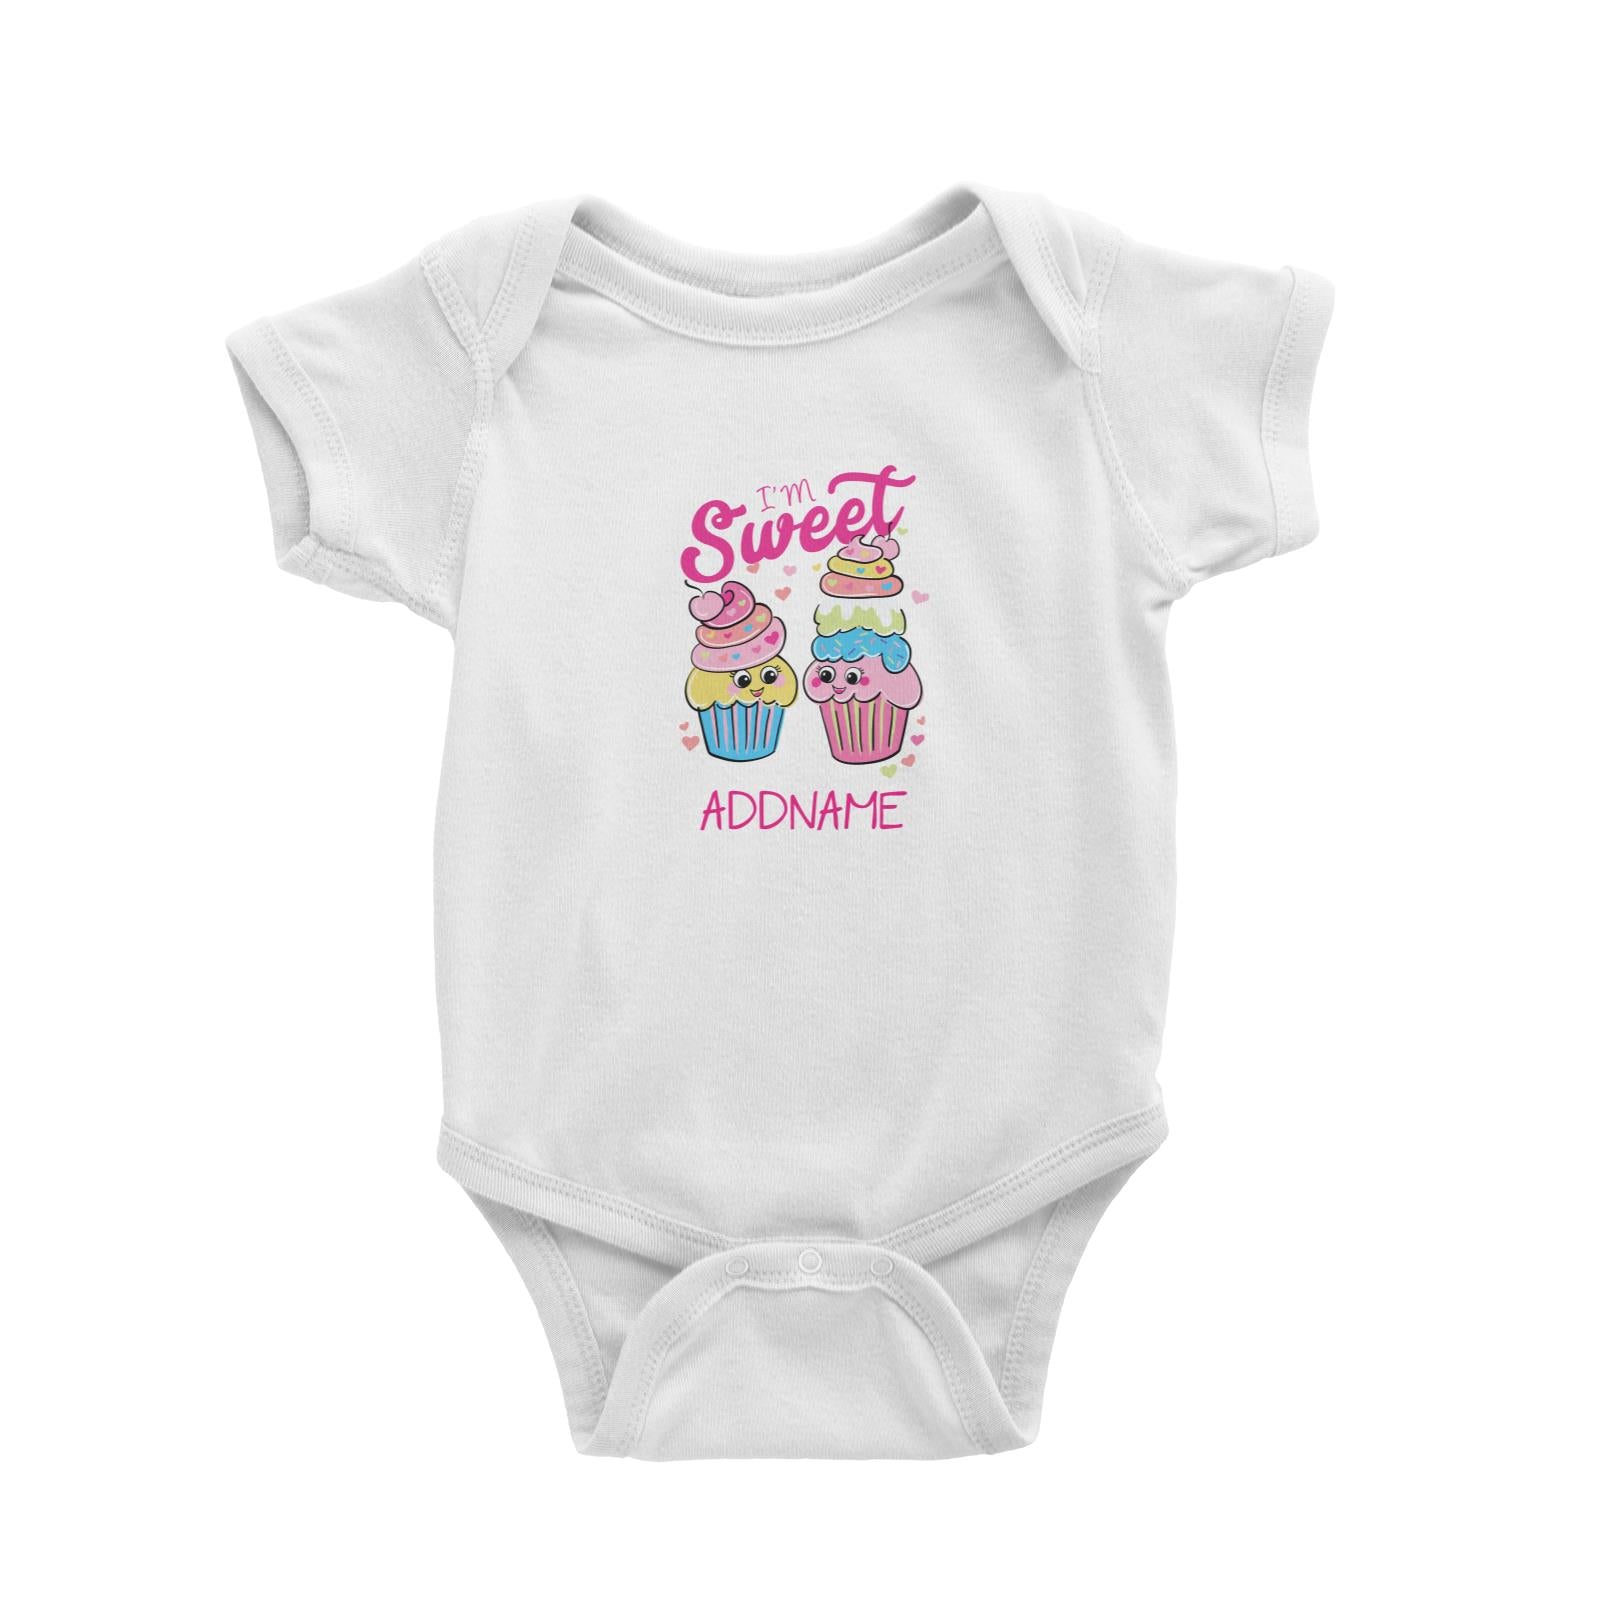 Cool Vibrant Series I'm Sweet Cupcakes Addname Baby Romper